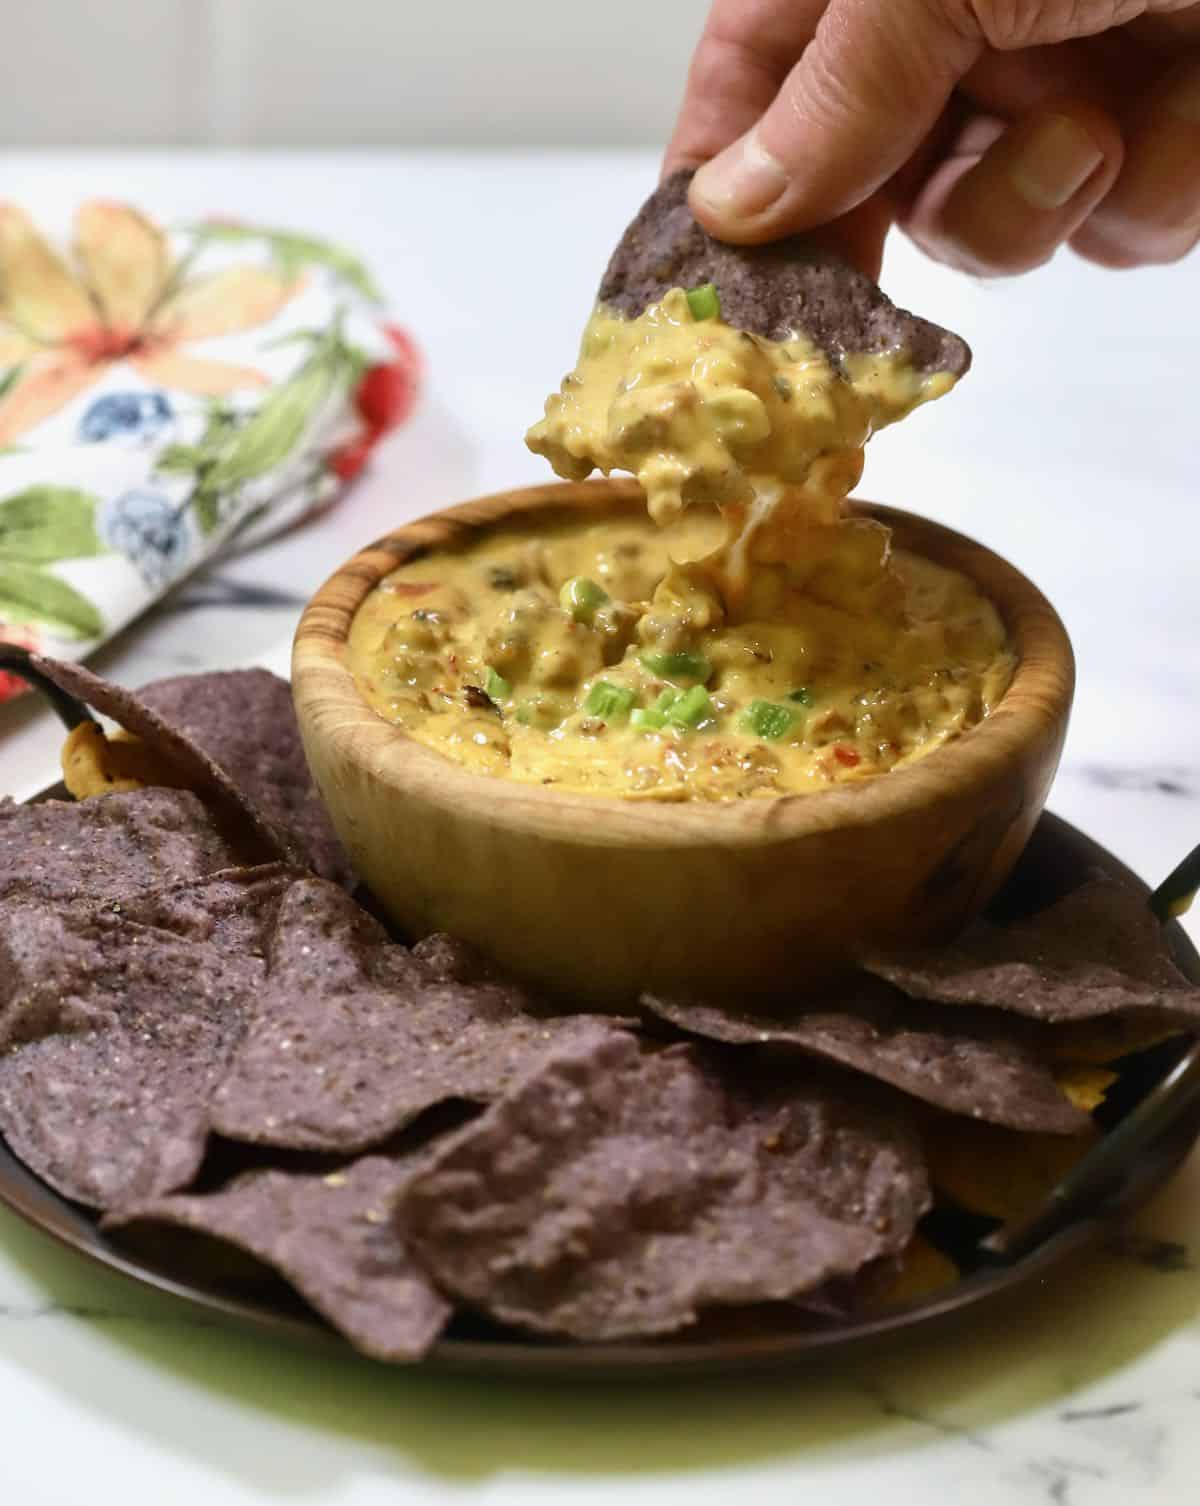 A bowl of smoked queso with chips.